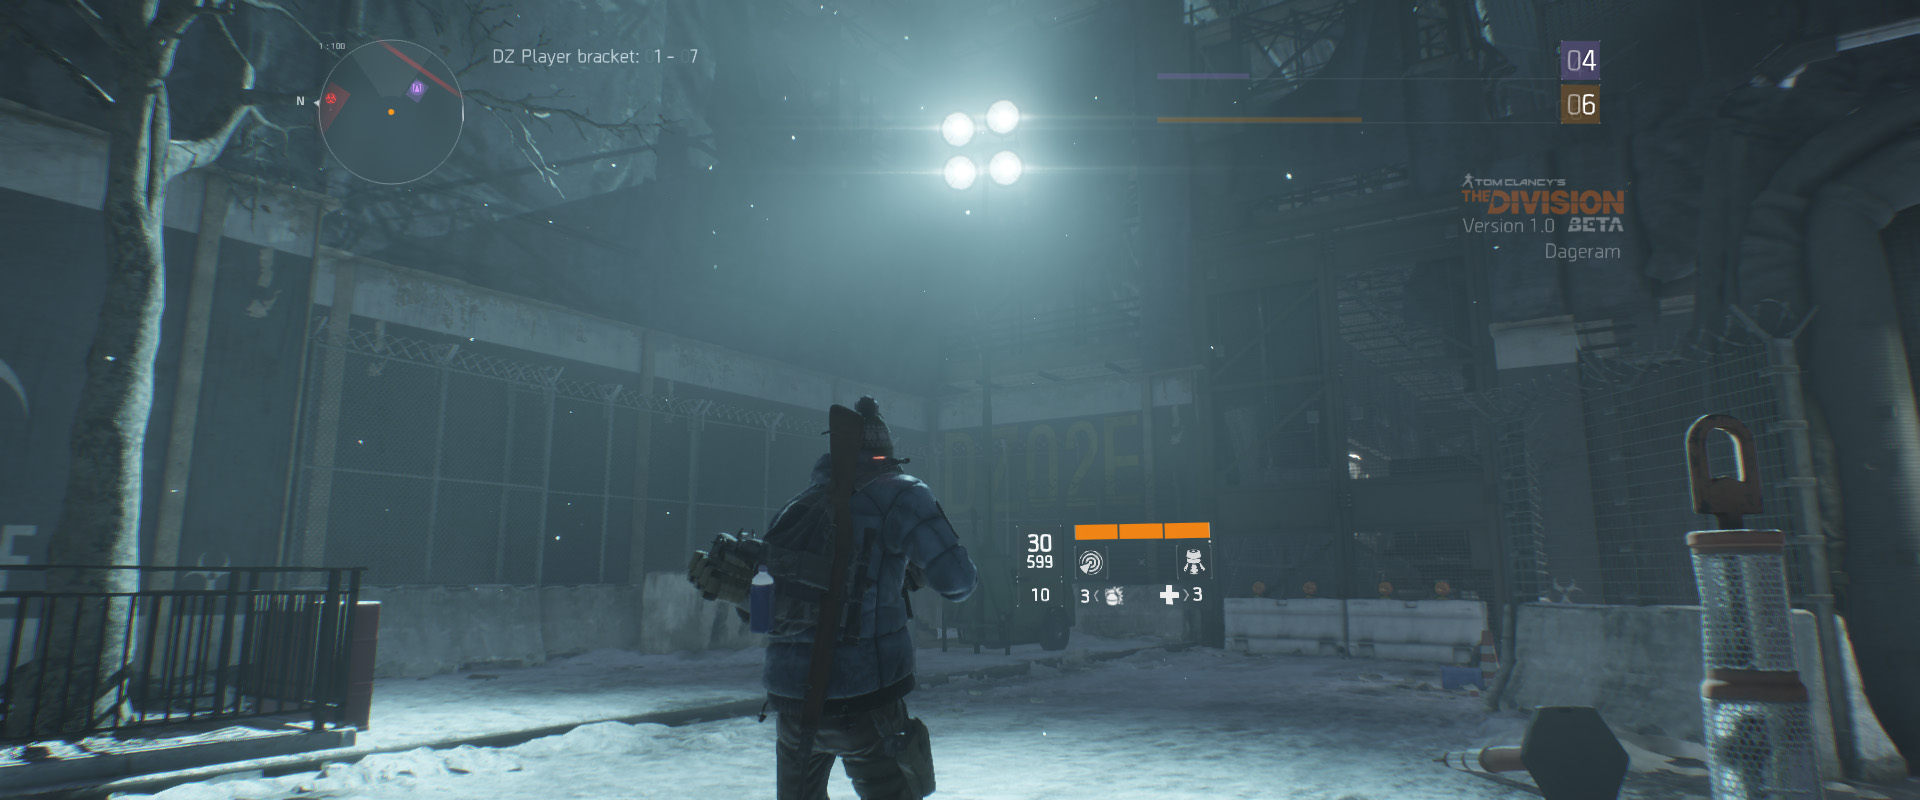 thedivision_2016_01_3syqwm.jpg